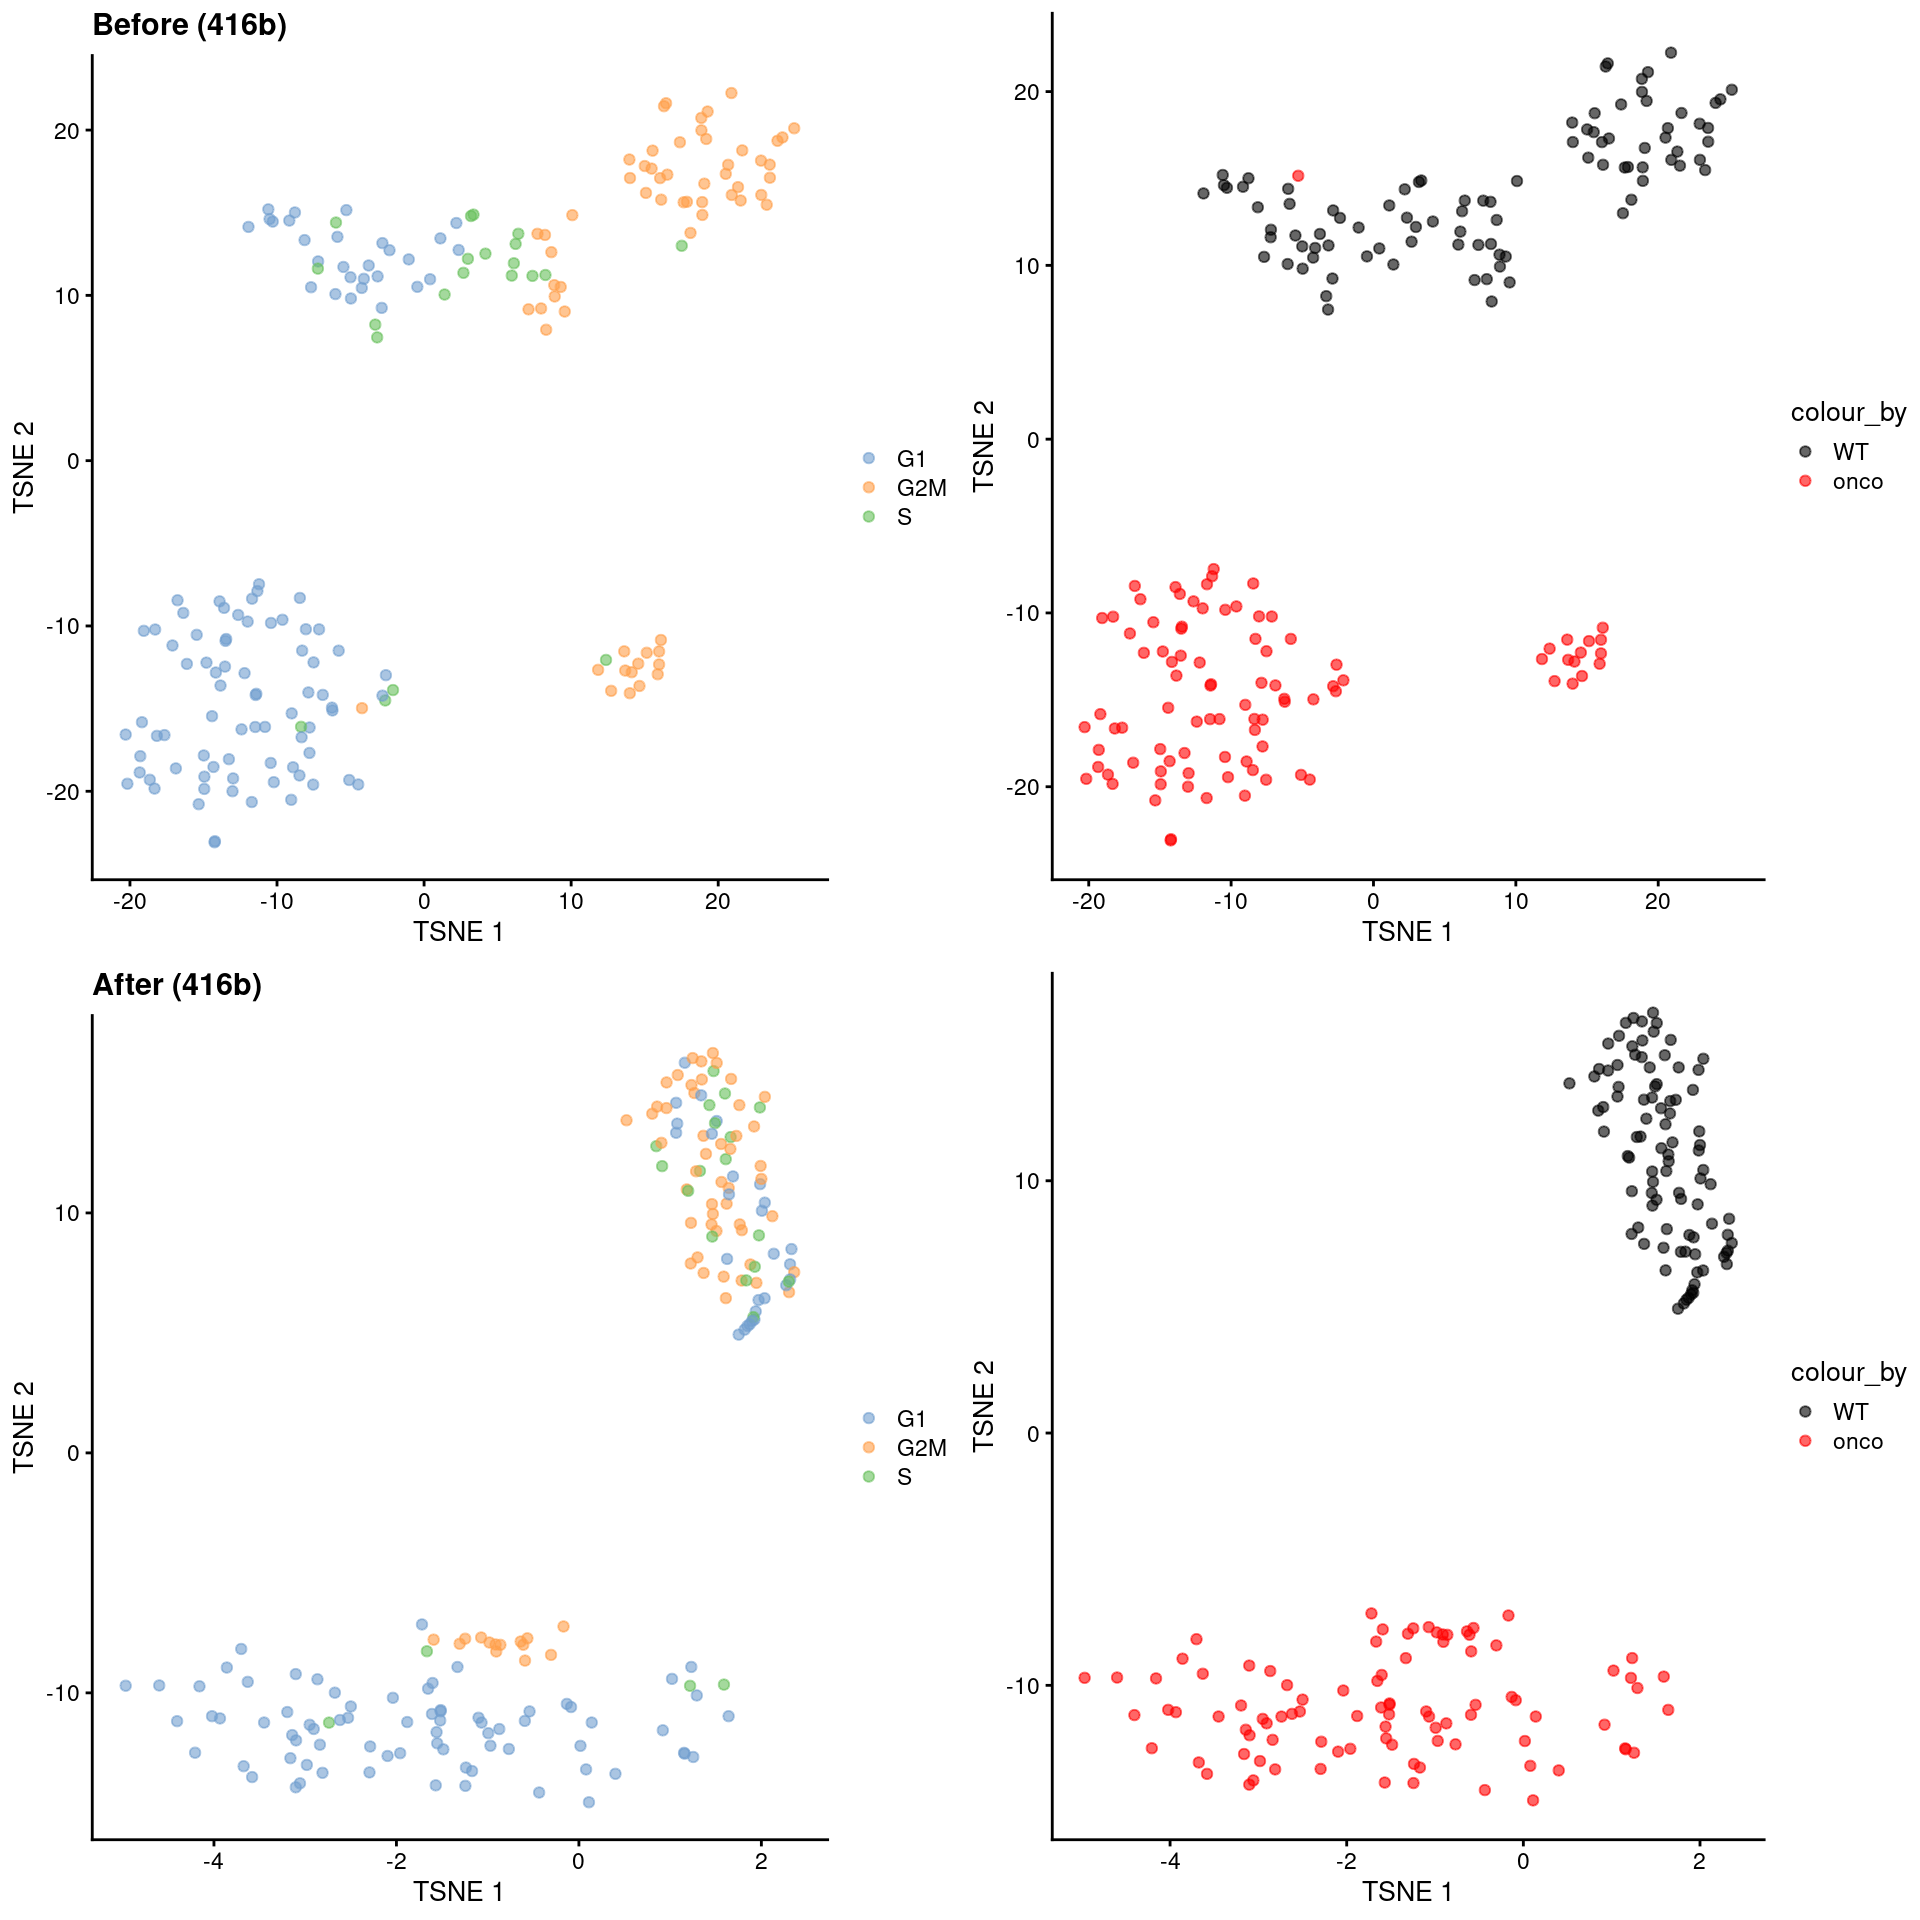 $t$-SNE plots for the 416B dataset before and after contrastive PCA. Each point is a cell and is colored according to its inferred cell cycle phase (left) or oncogene induction status (right).